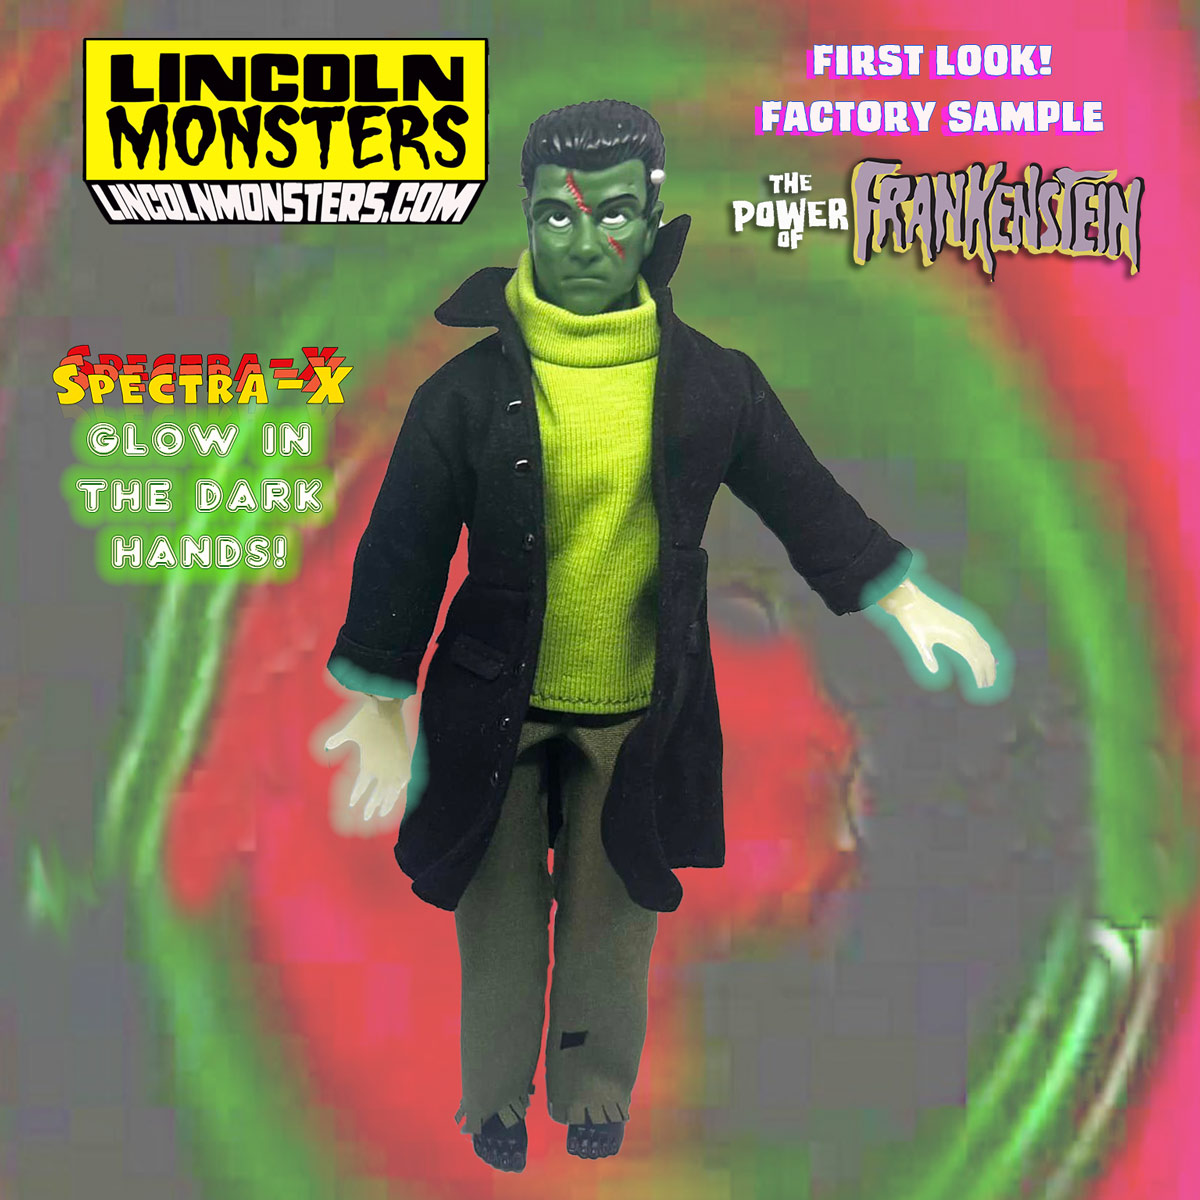 Lincoln Monsters Exclusive Reveal!